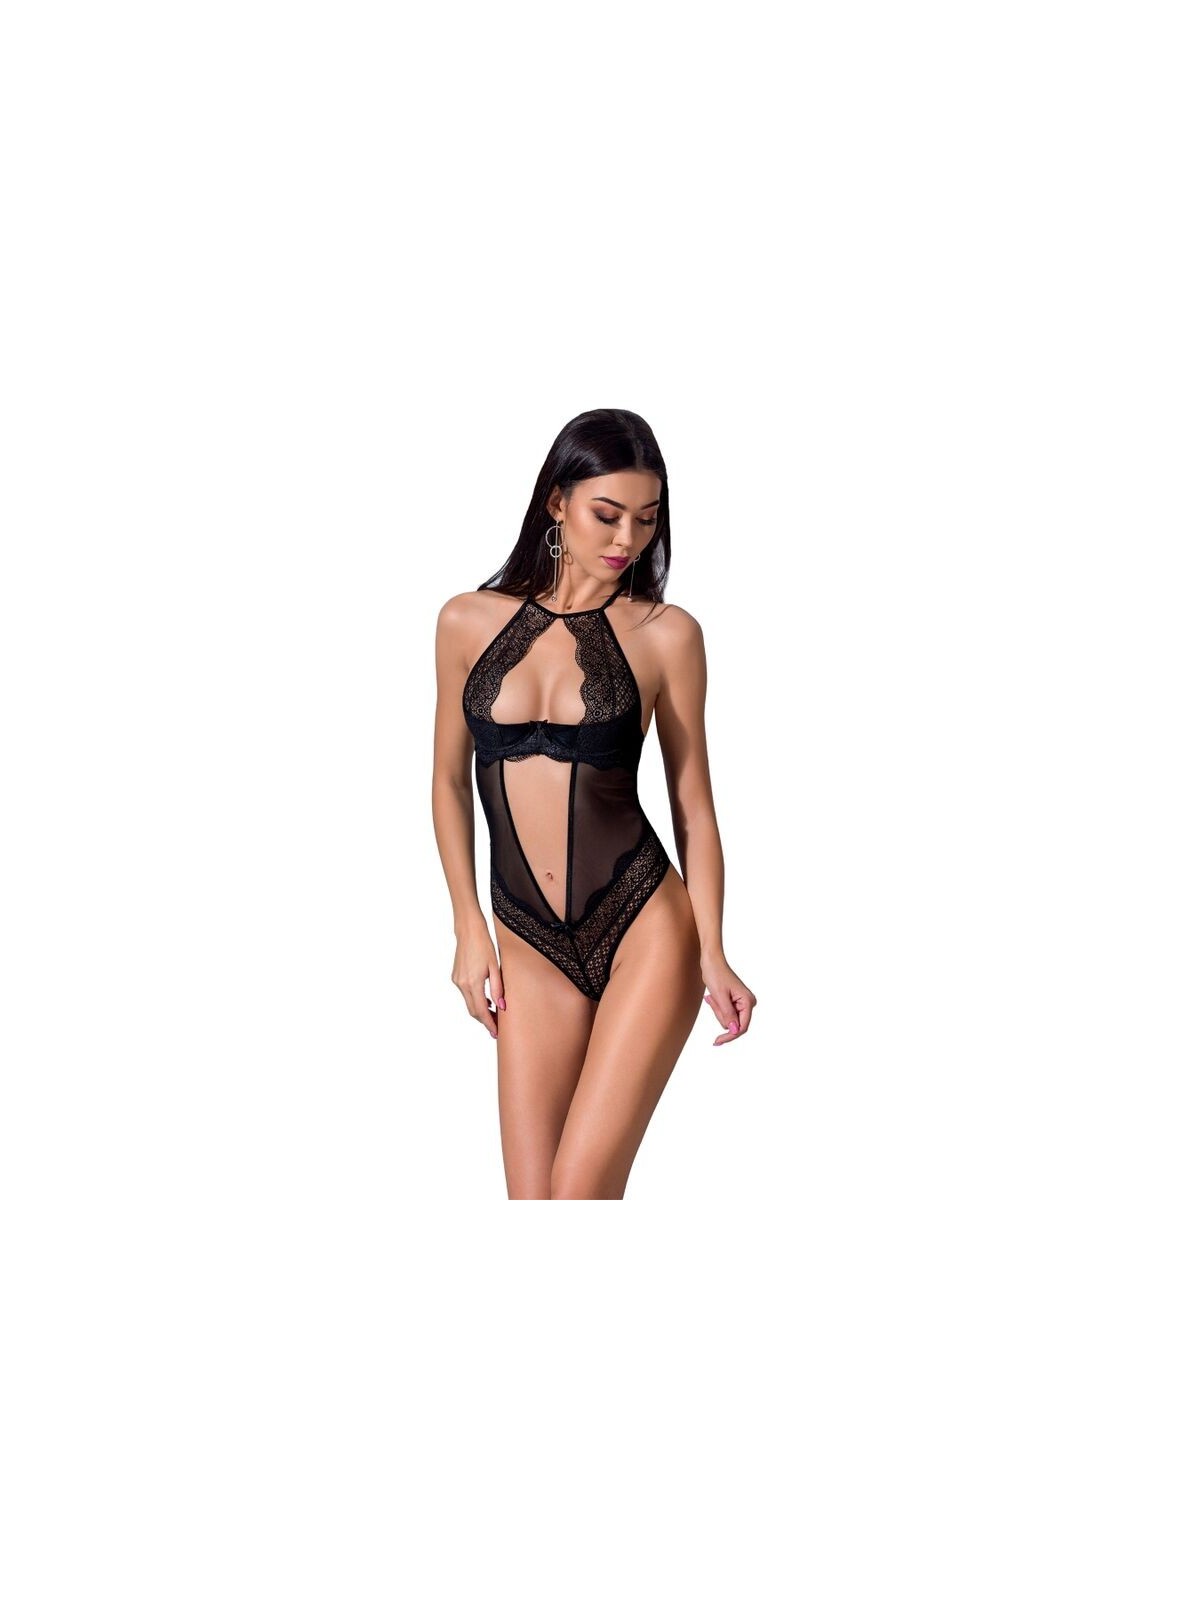 Passion Yona Teddy - Comprar Body sexy Passion - Bodys sexys (1)